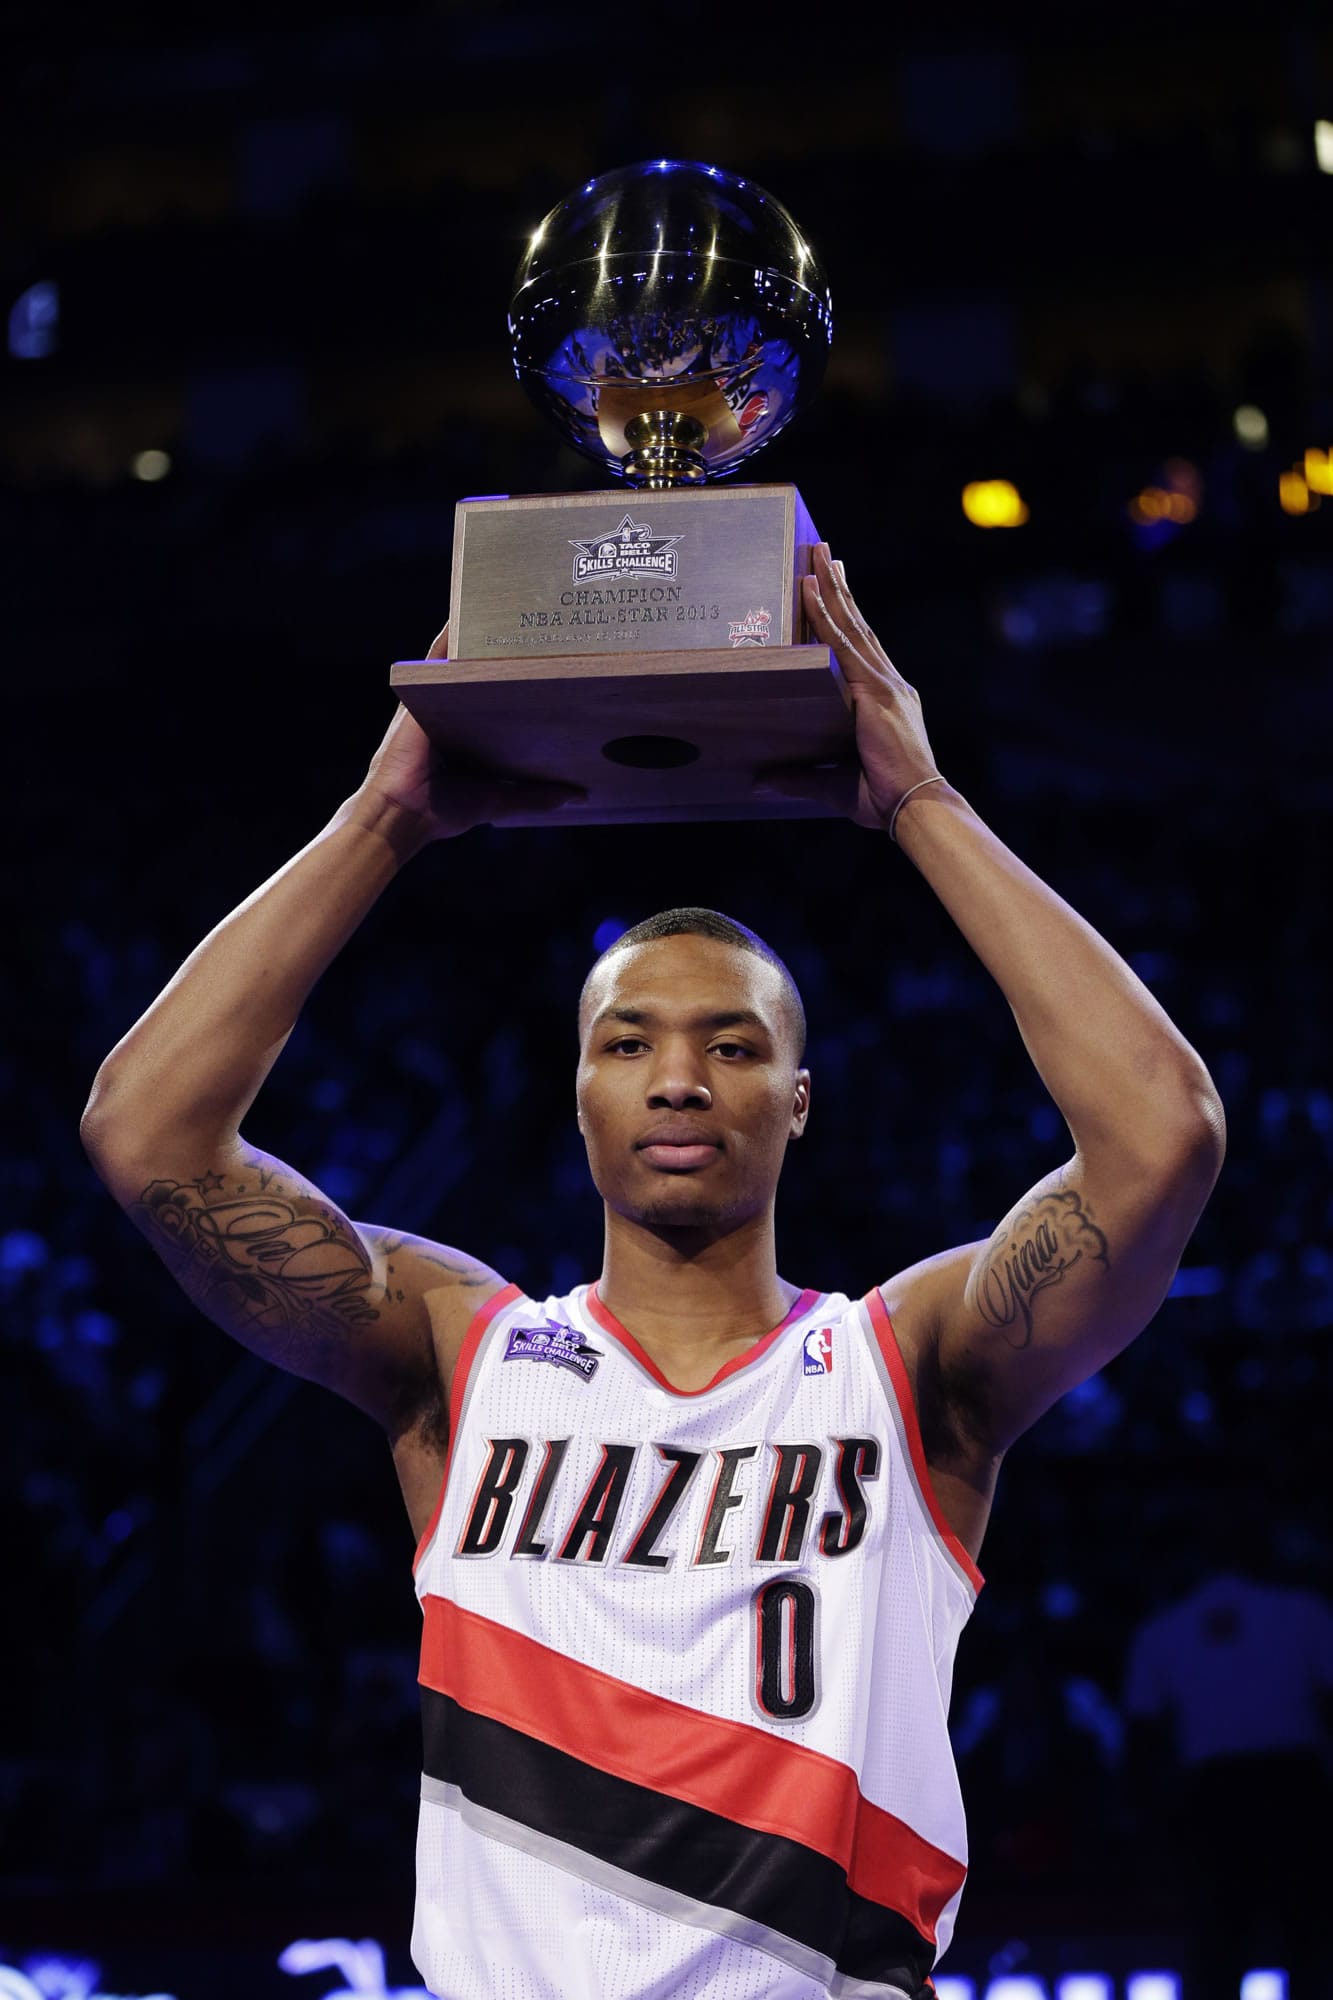 Damian Lillard of the Portland Trail Blazers raises the trophy after winning the skills challenge during NBA basketball All-Star Saturday Night in Houston.